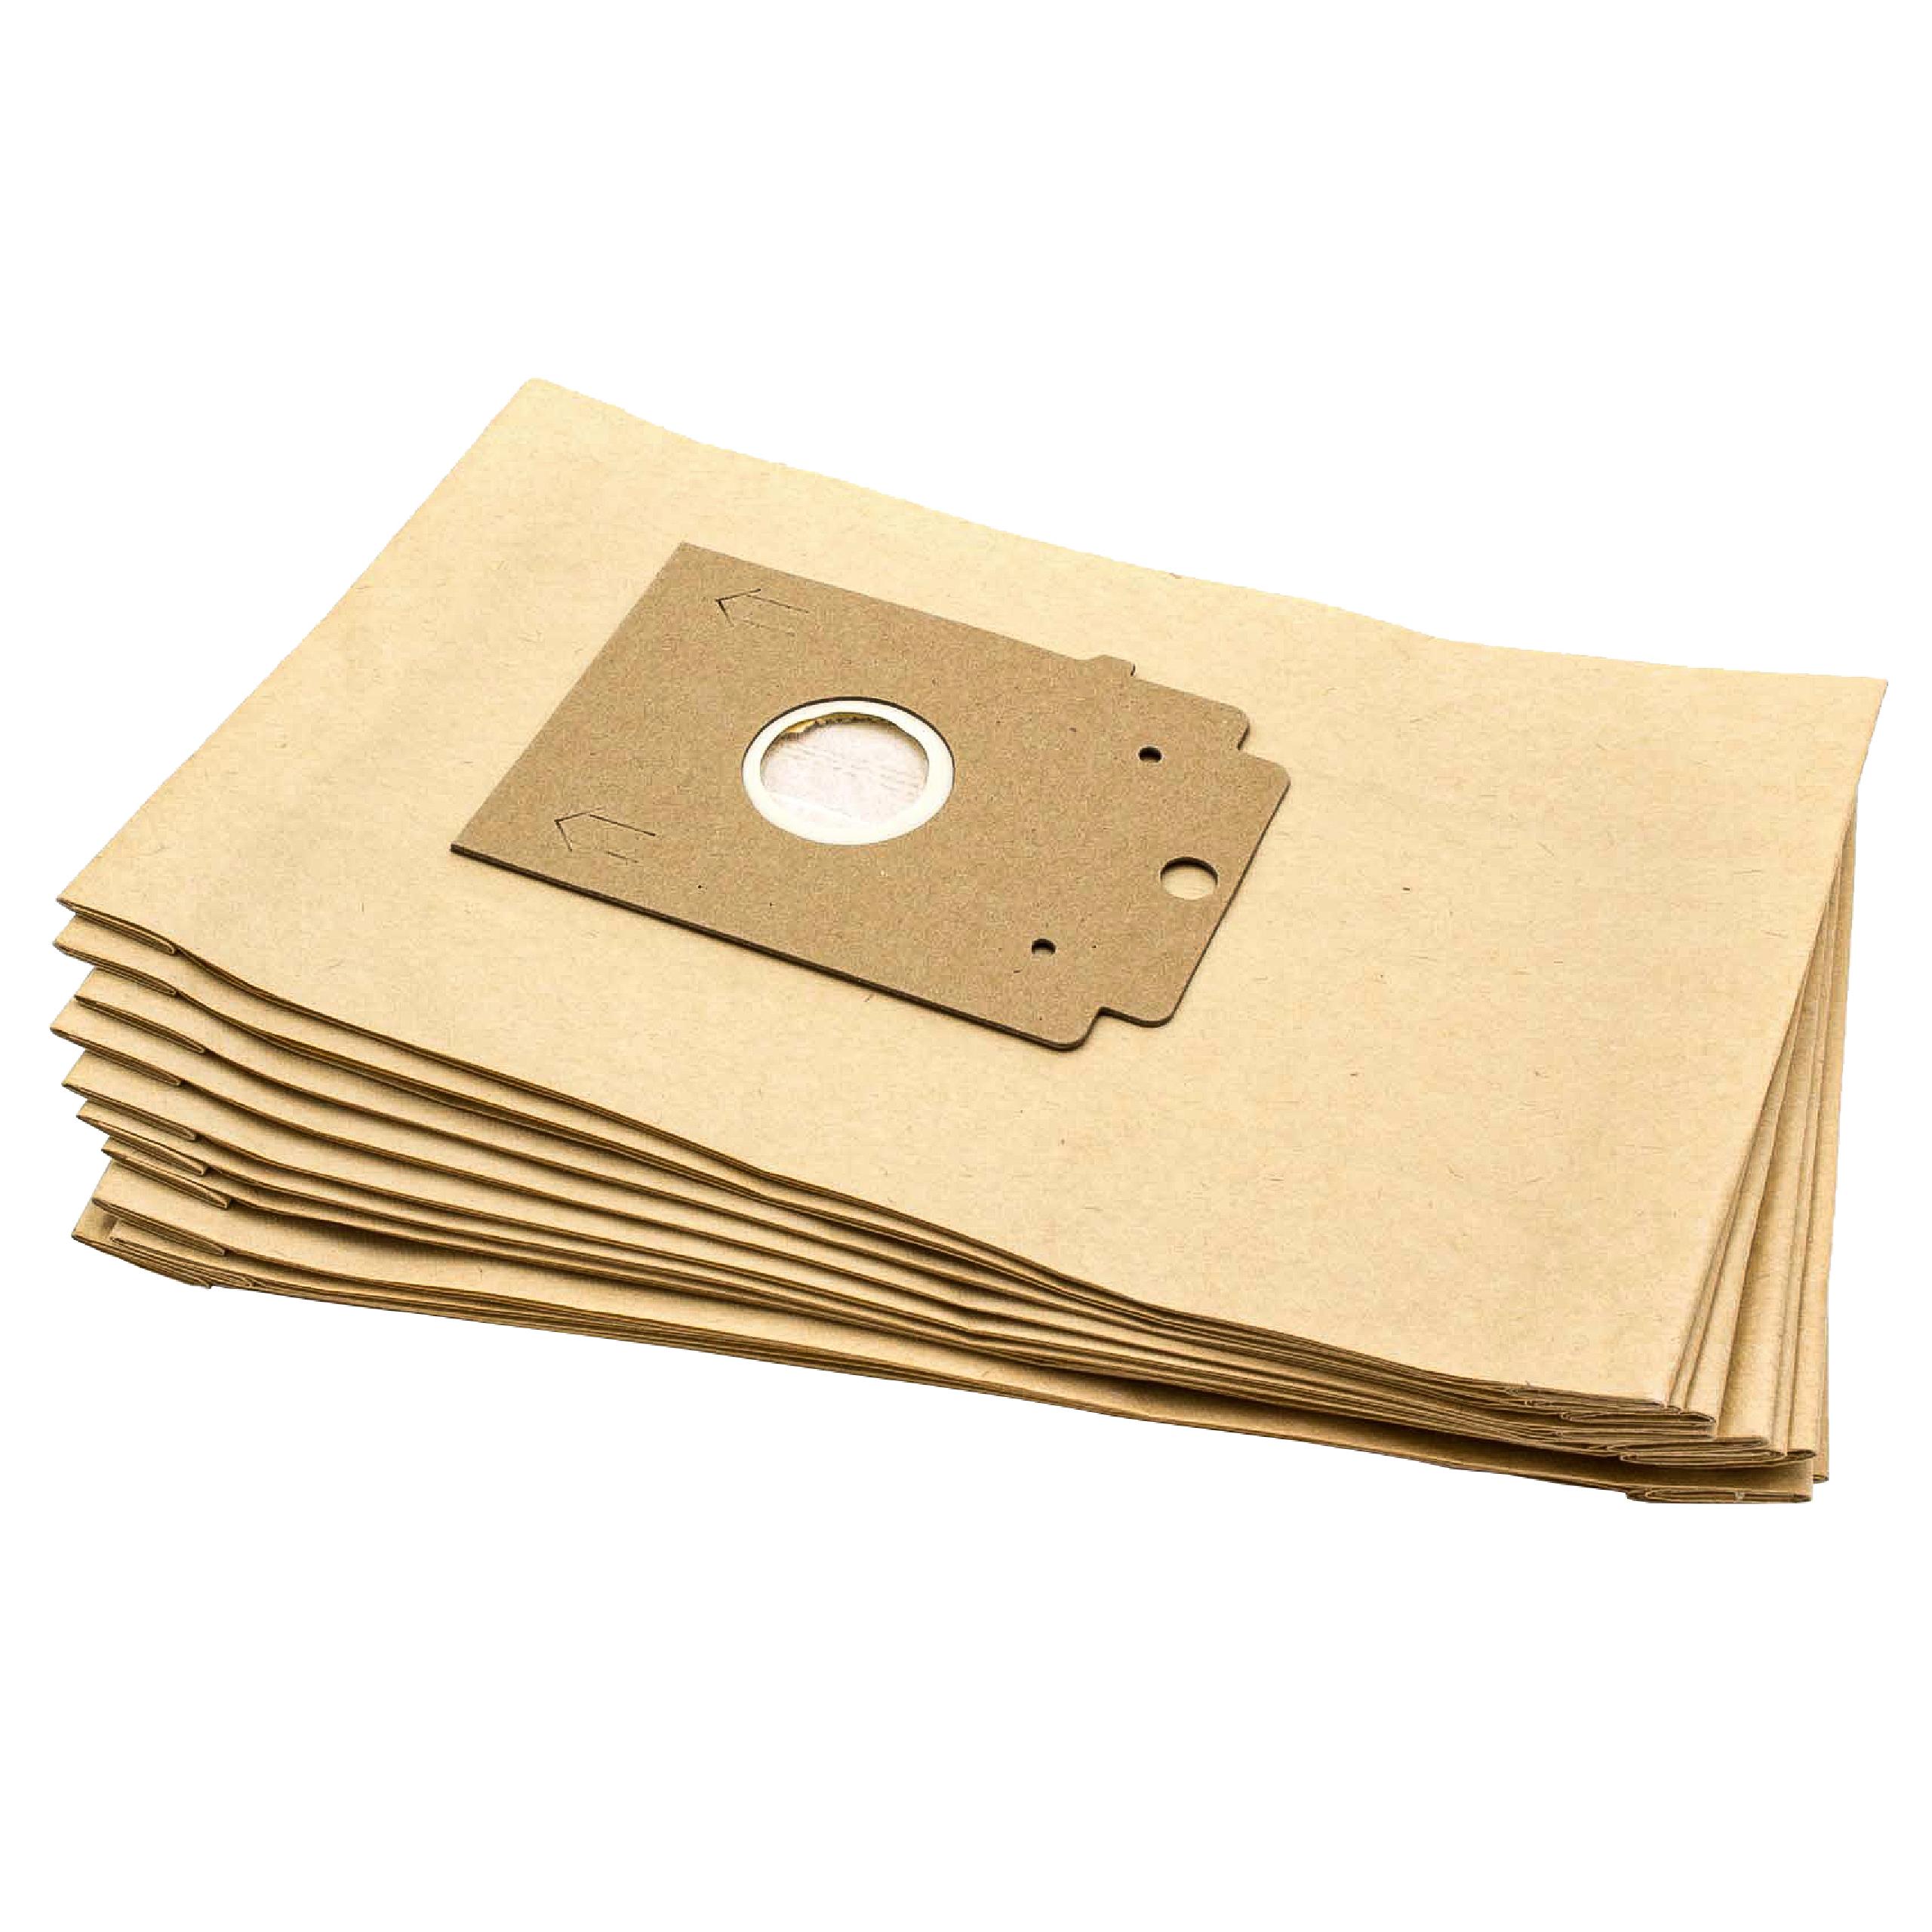 10x Vacuum Cleaner Bag replaces Bosch size K for Bosch - paper